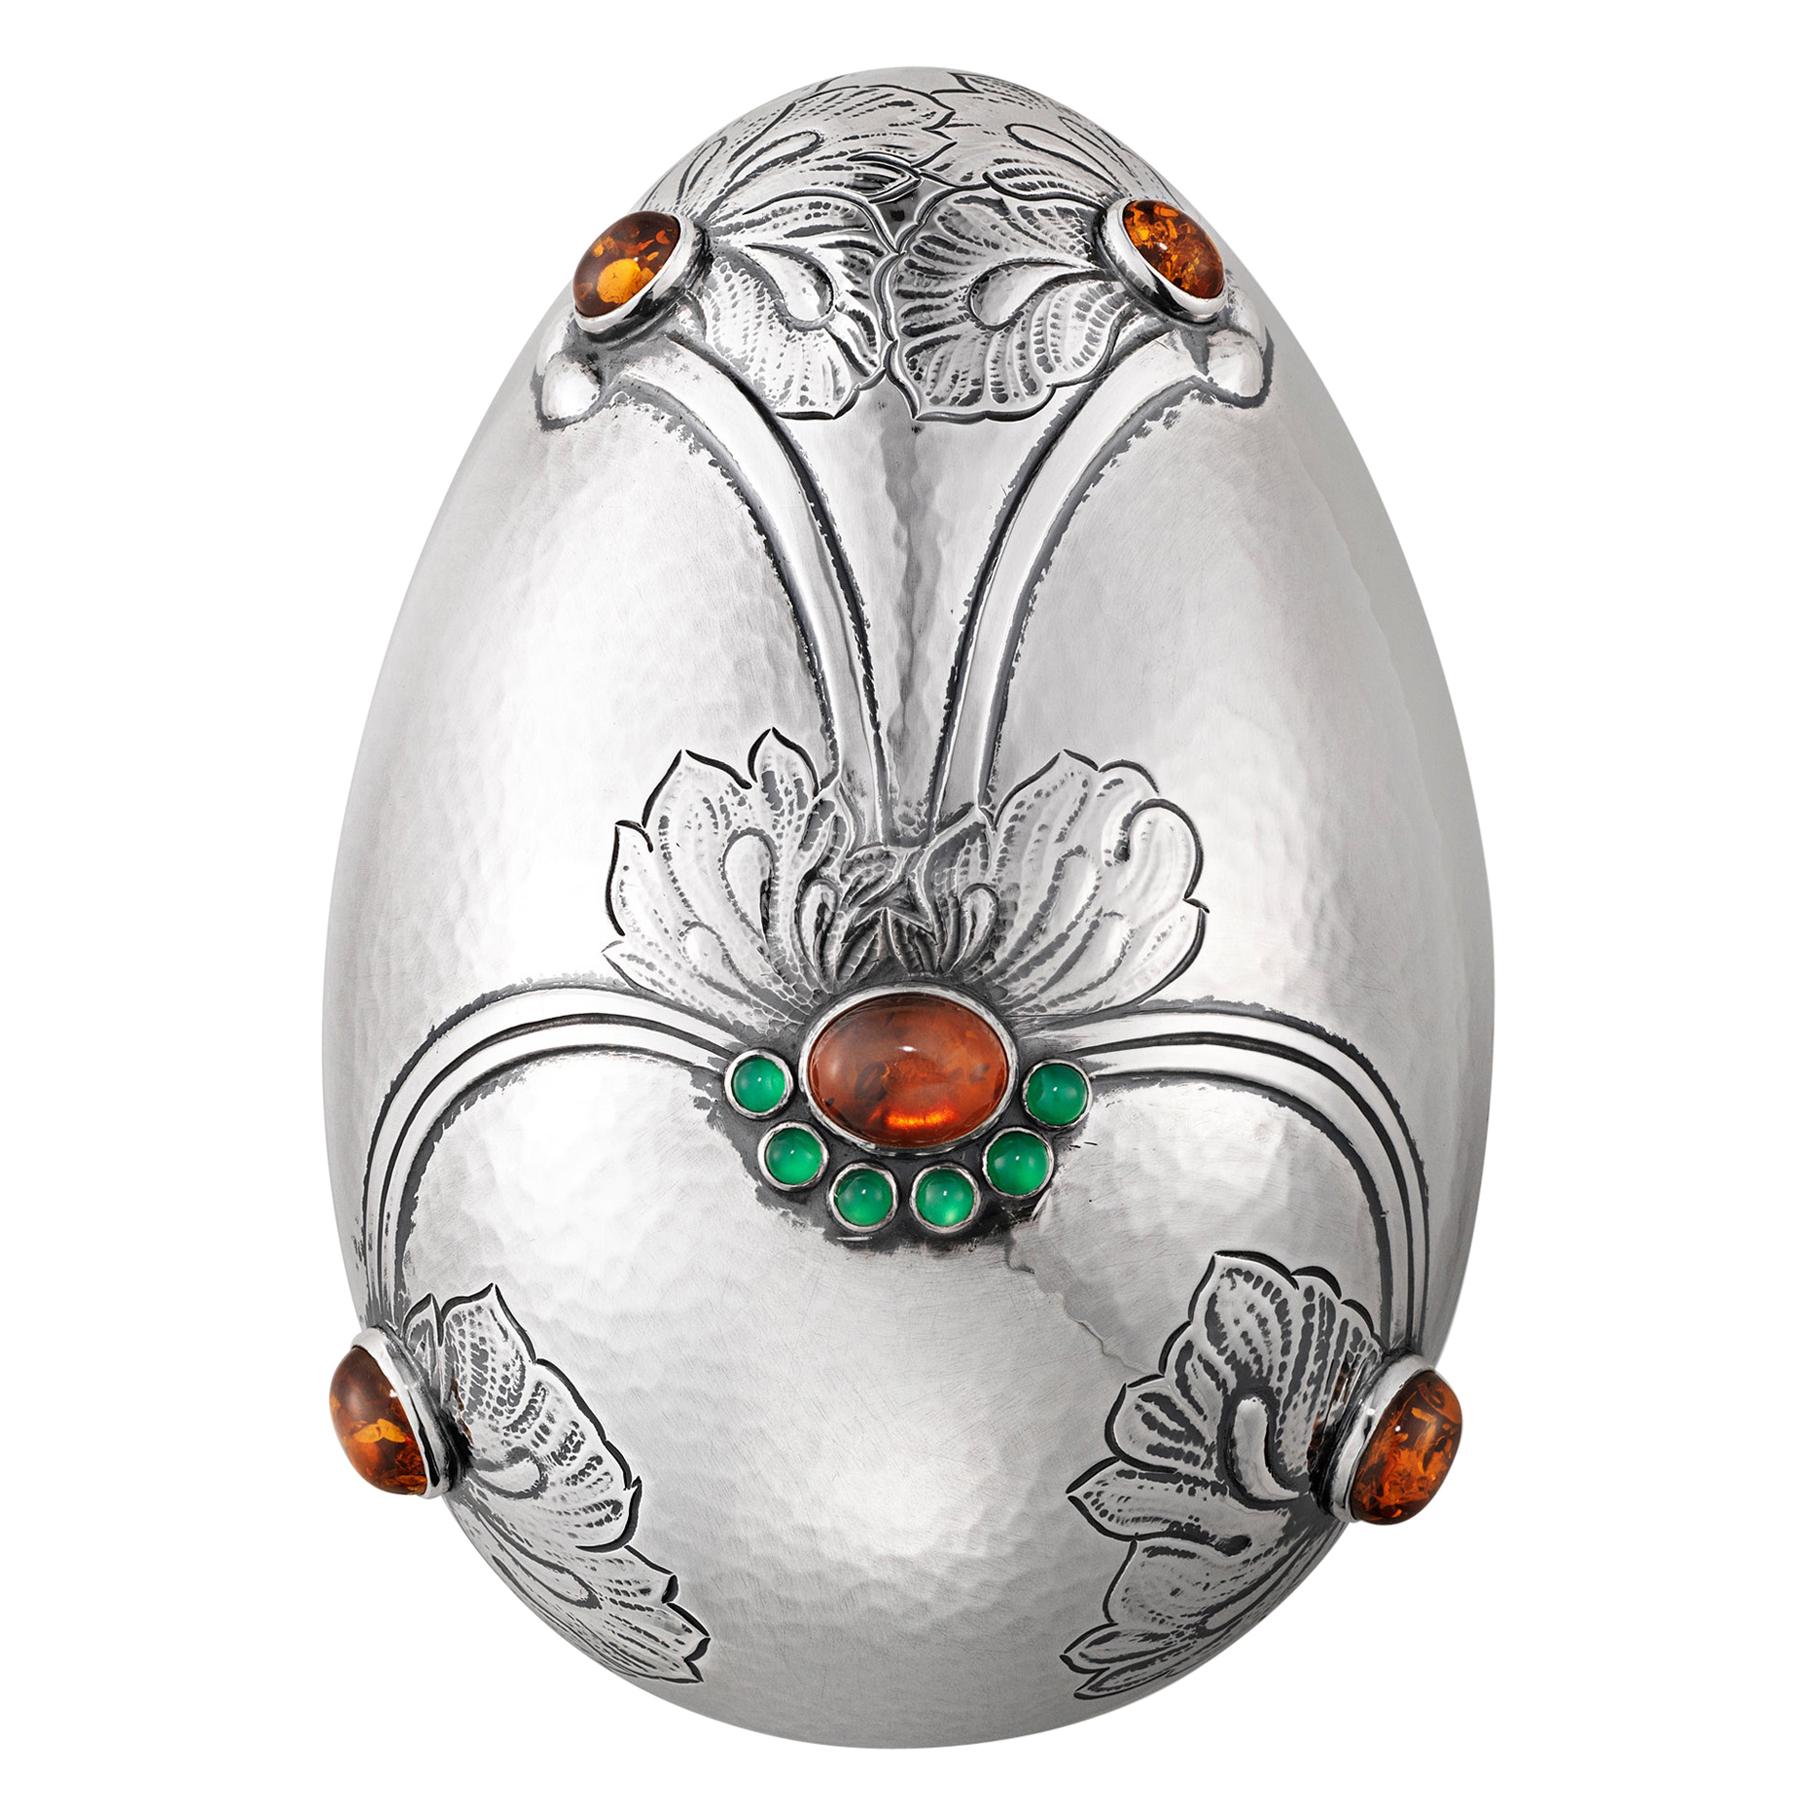 Georg Jensen Handcrafted Sterling Silver Egg by Gj Amber/Gr. Agate For Sale